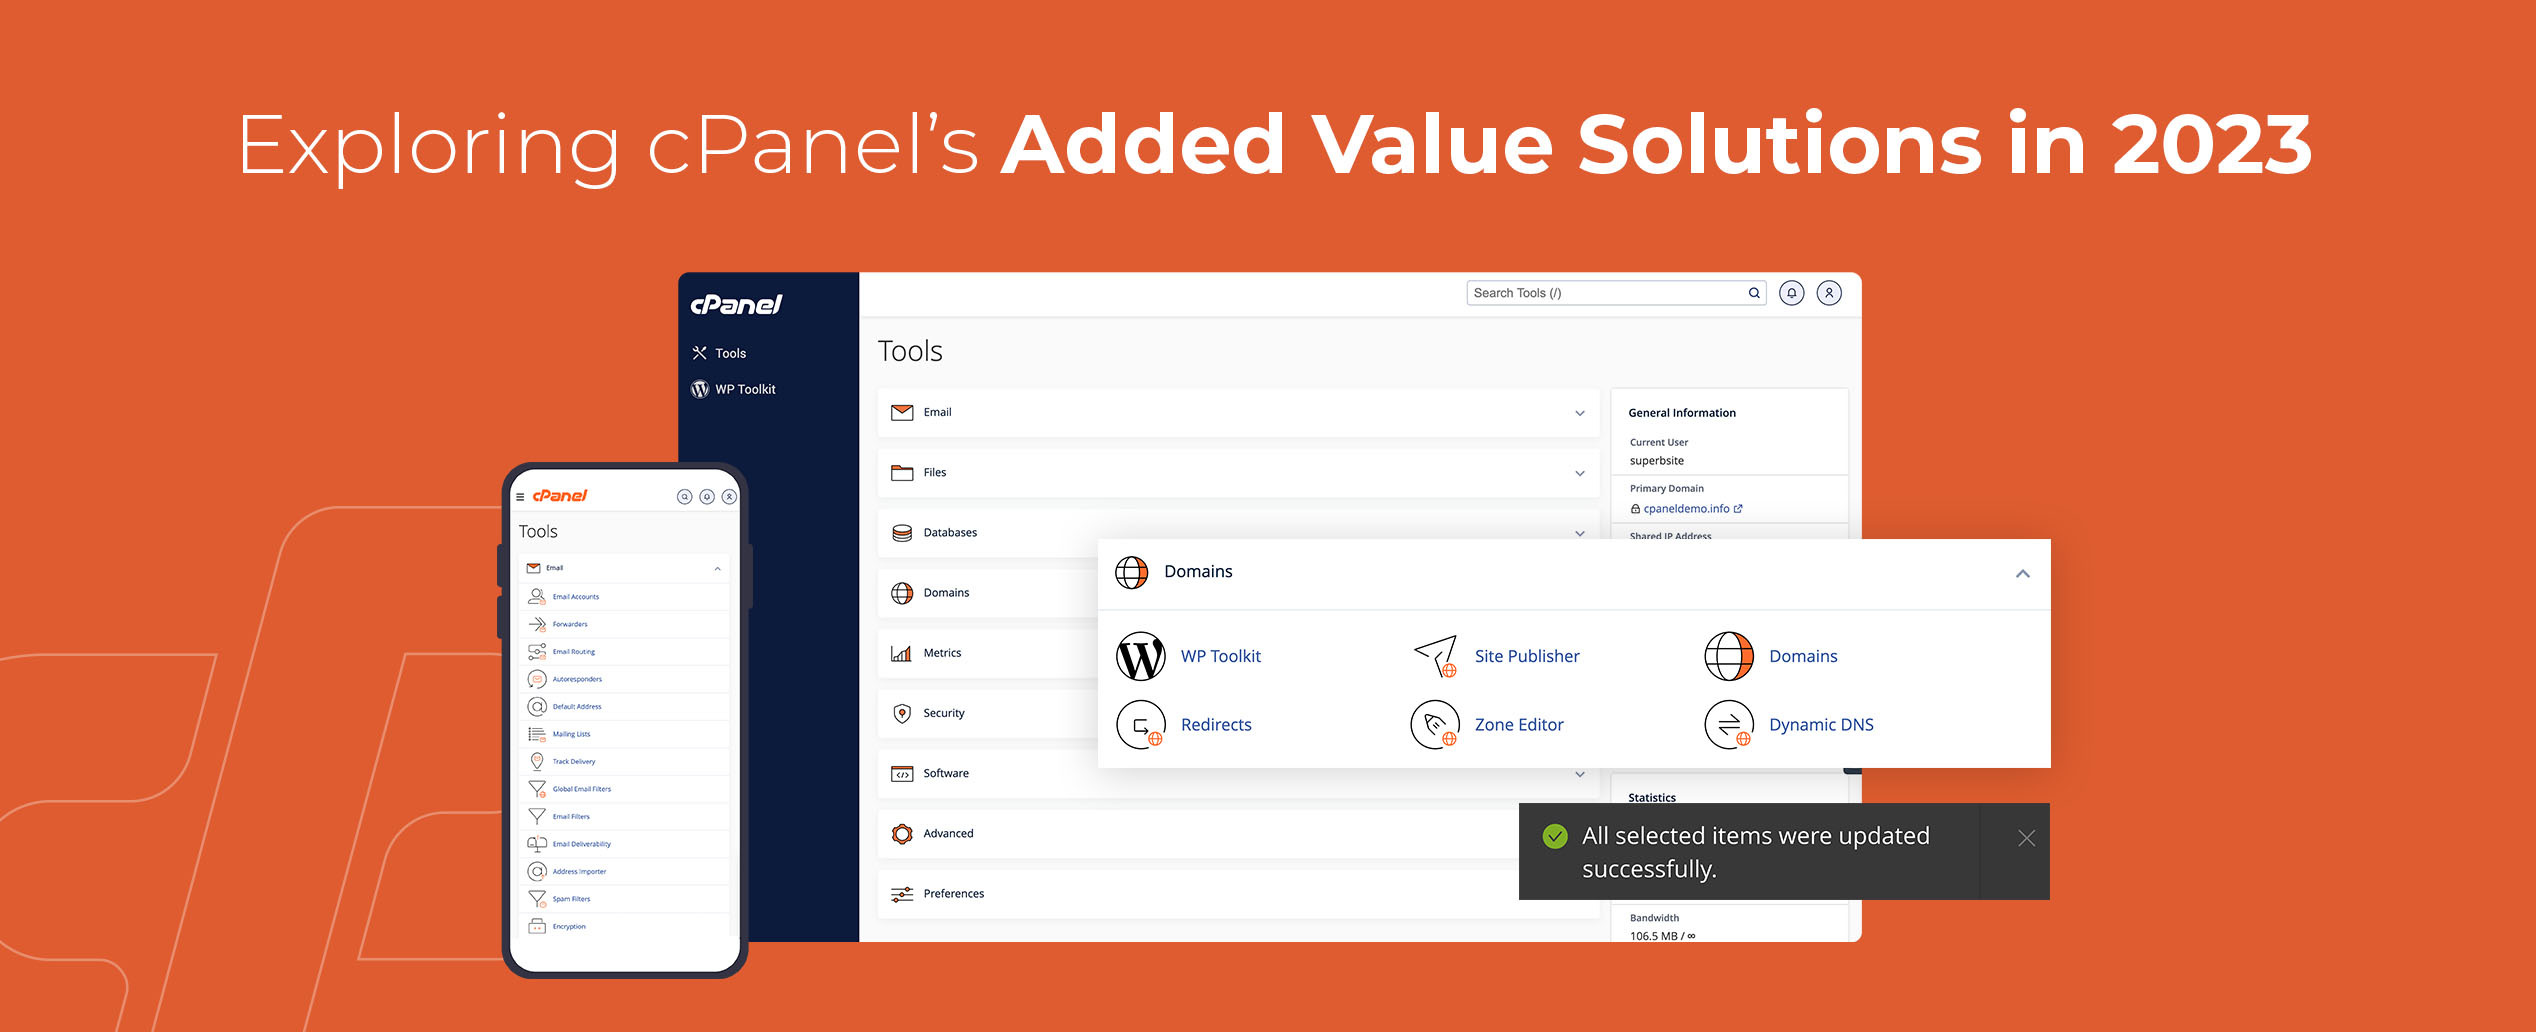 Exploring cPanel’s Added Value Solutions So Far in 2023